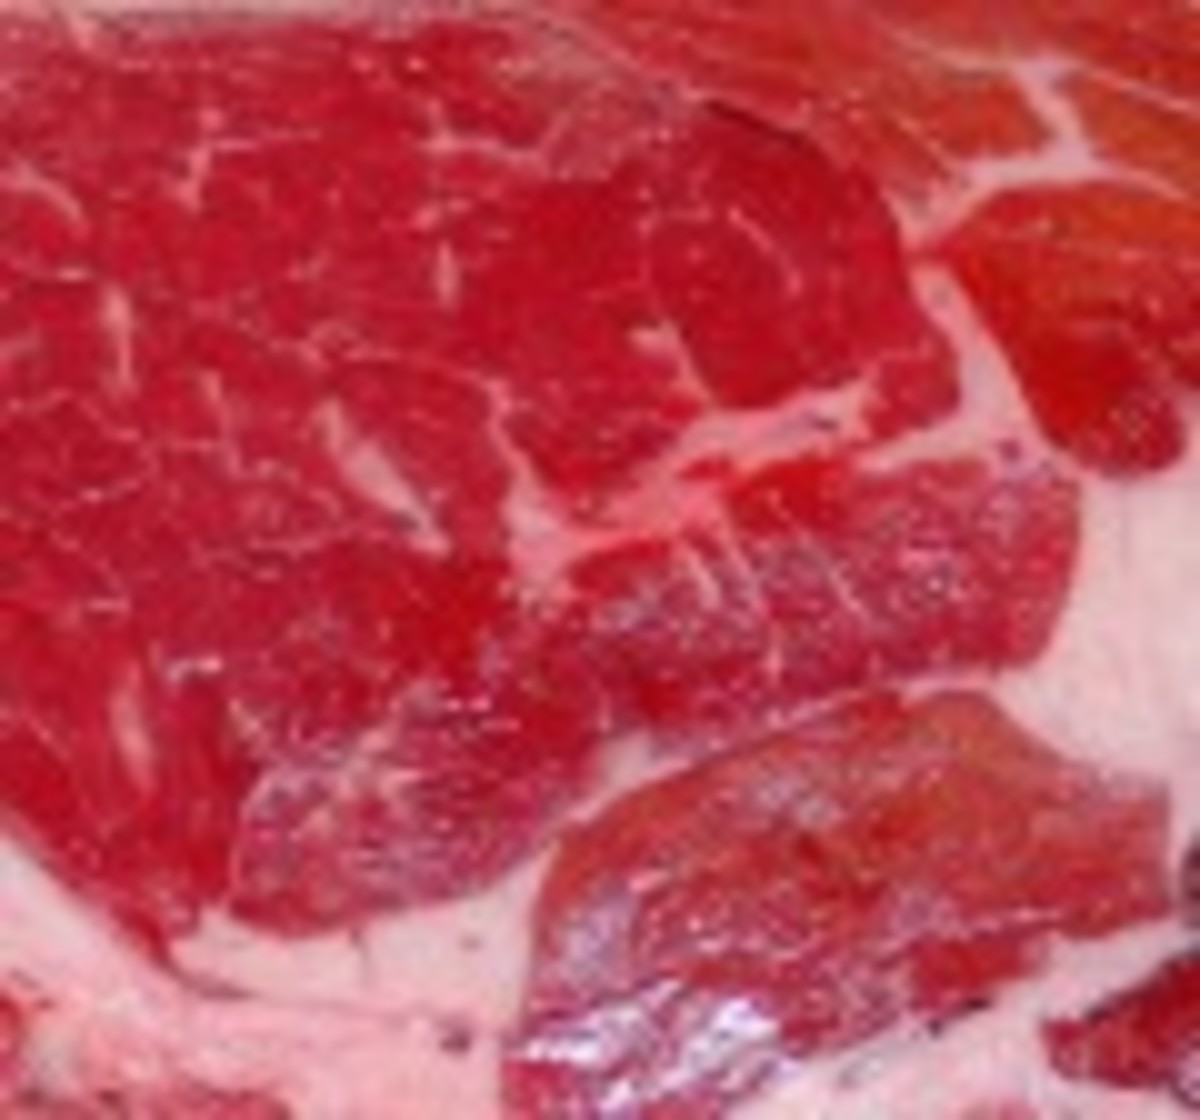 Bacteria is common in raw meat